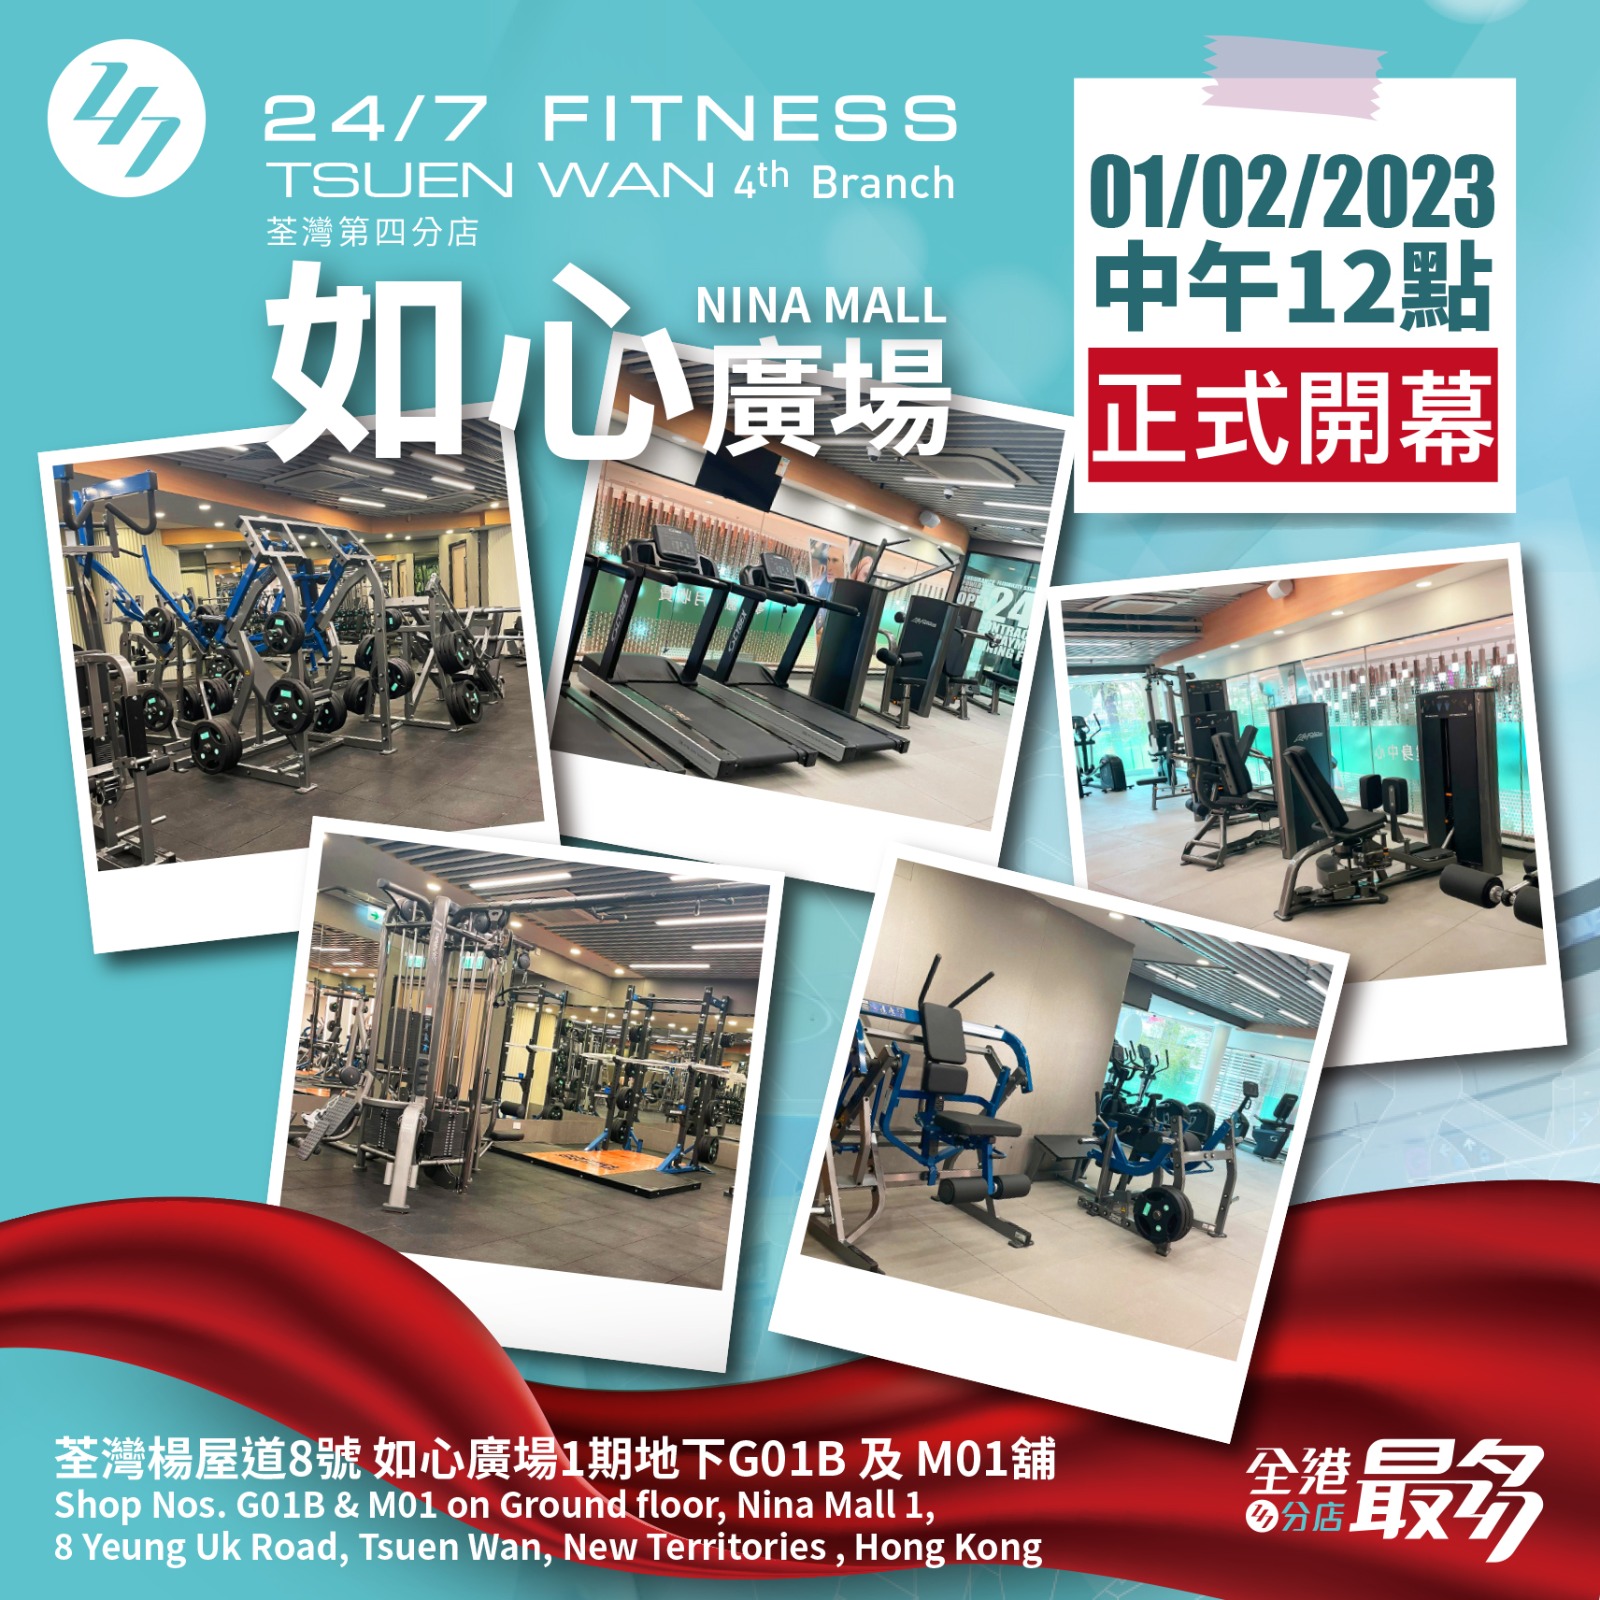 The 24/7 FITNESS Tsuen Wan Fourth Branch will be officially opened